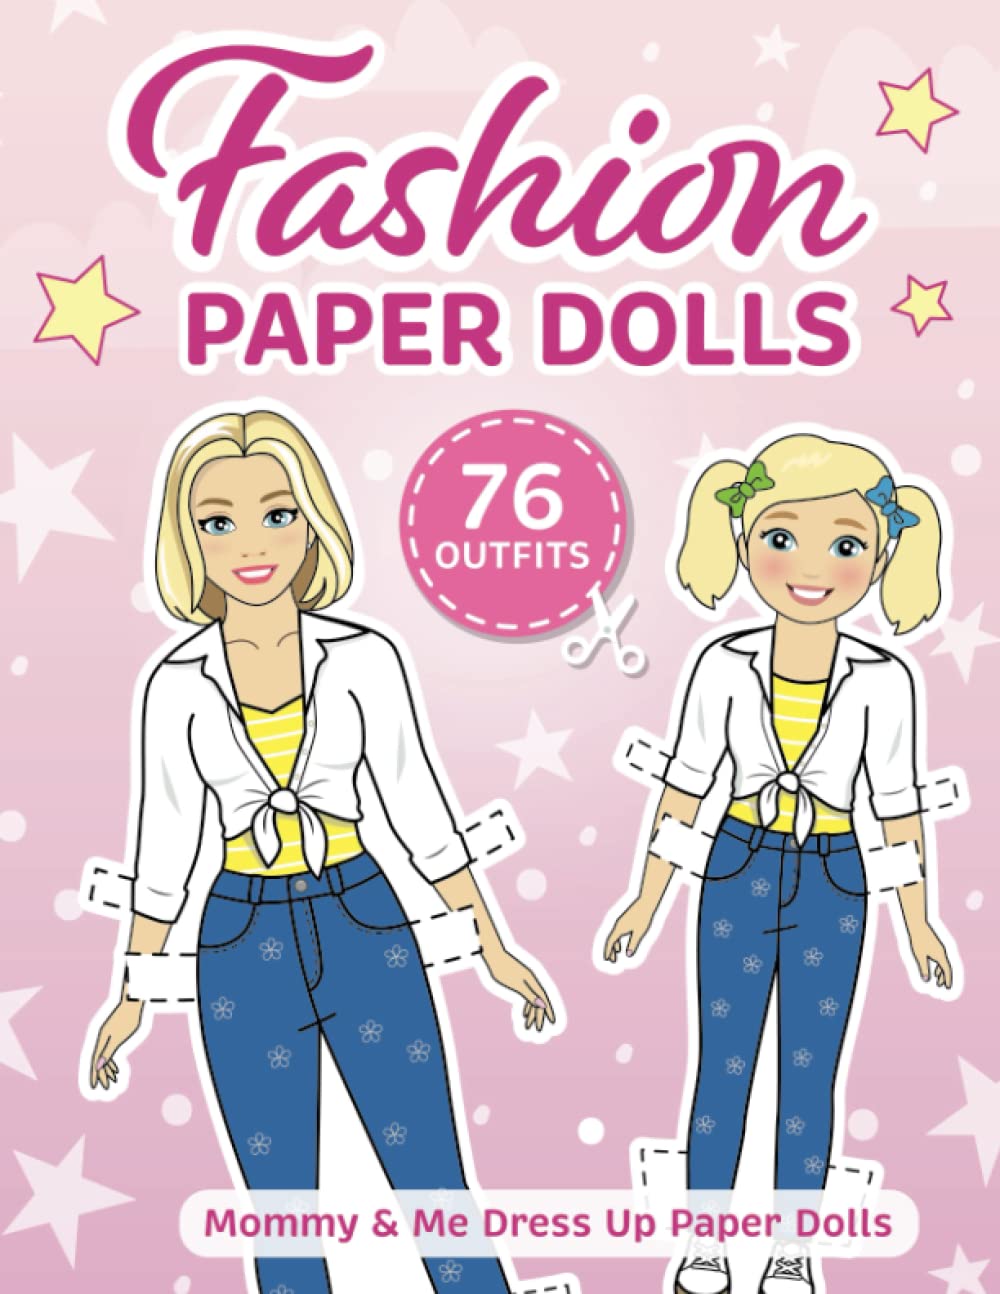 Fashion Paper Dolls - 76 Outfits: Mommy & Me Dress Up Paper Dolls